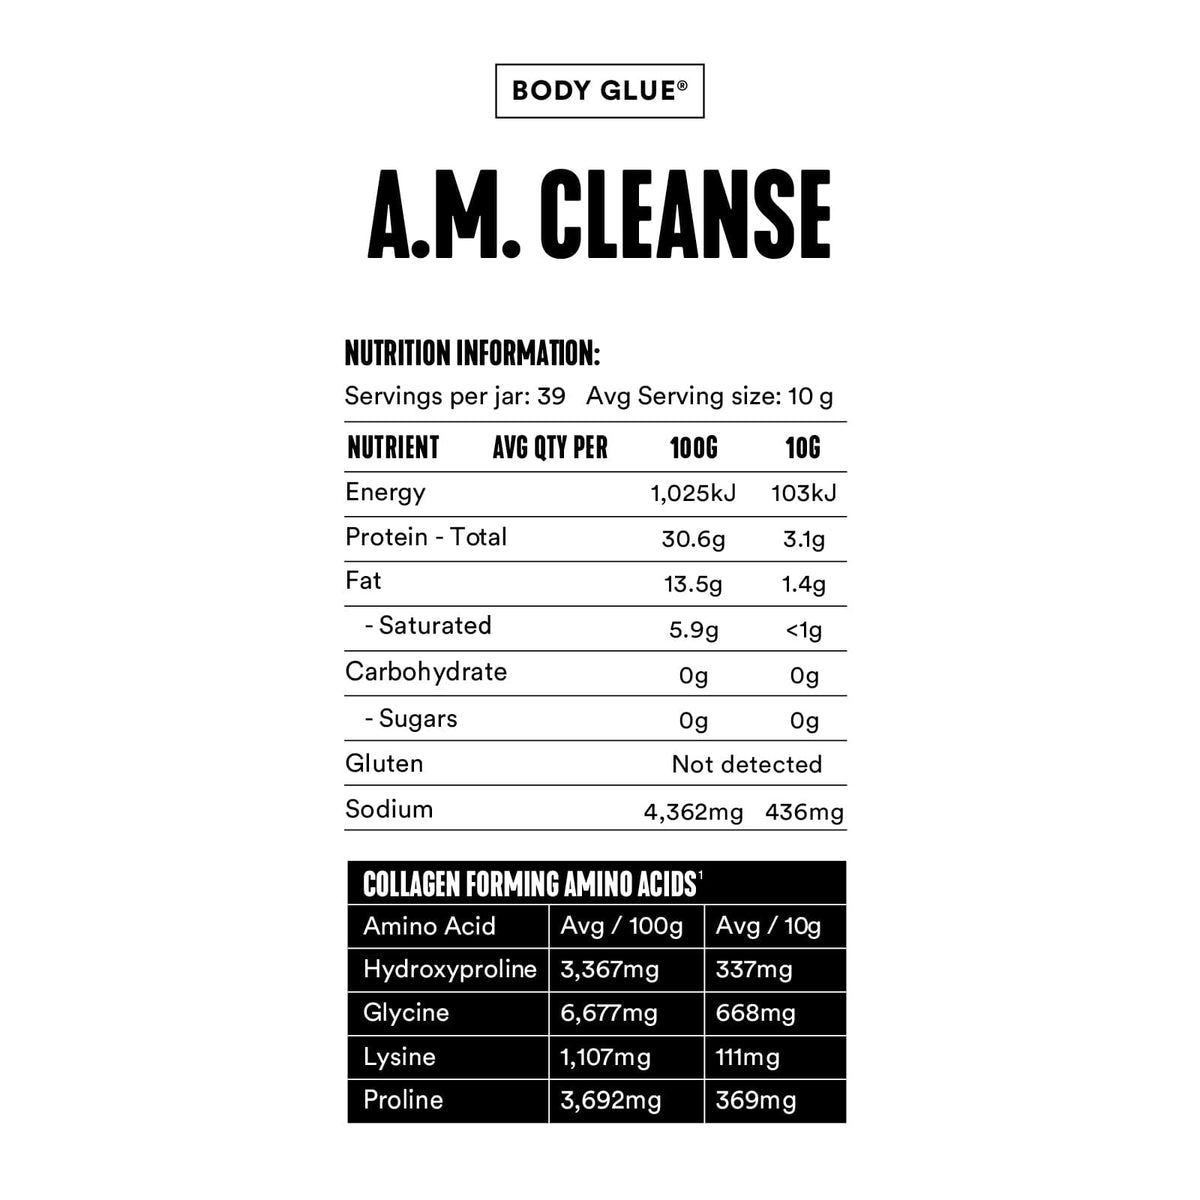 A.M. Cleanse